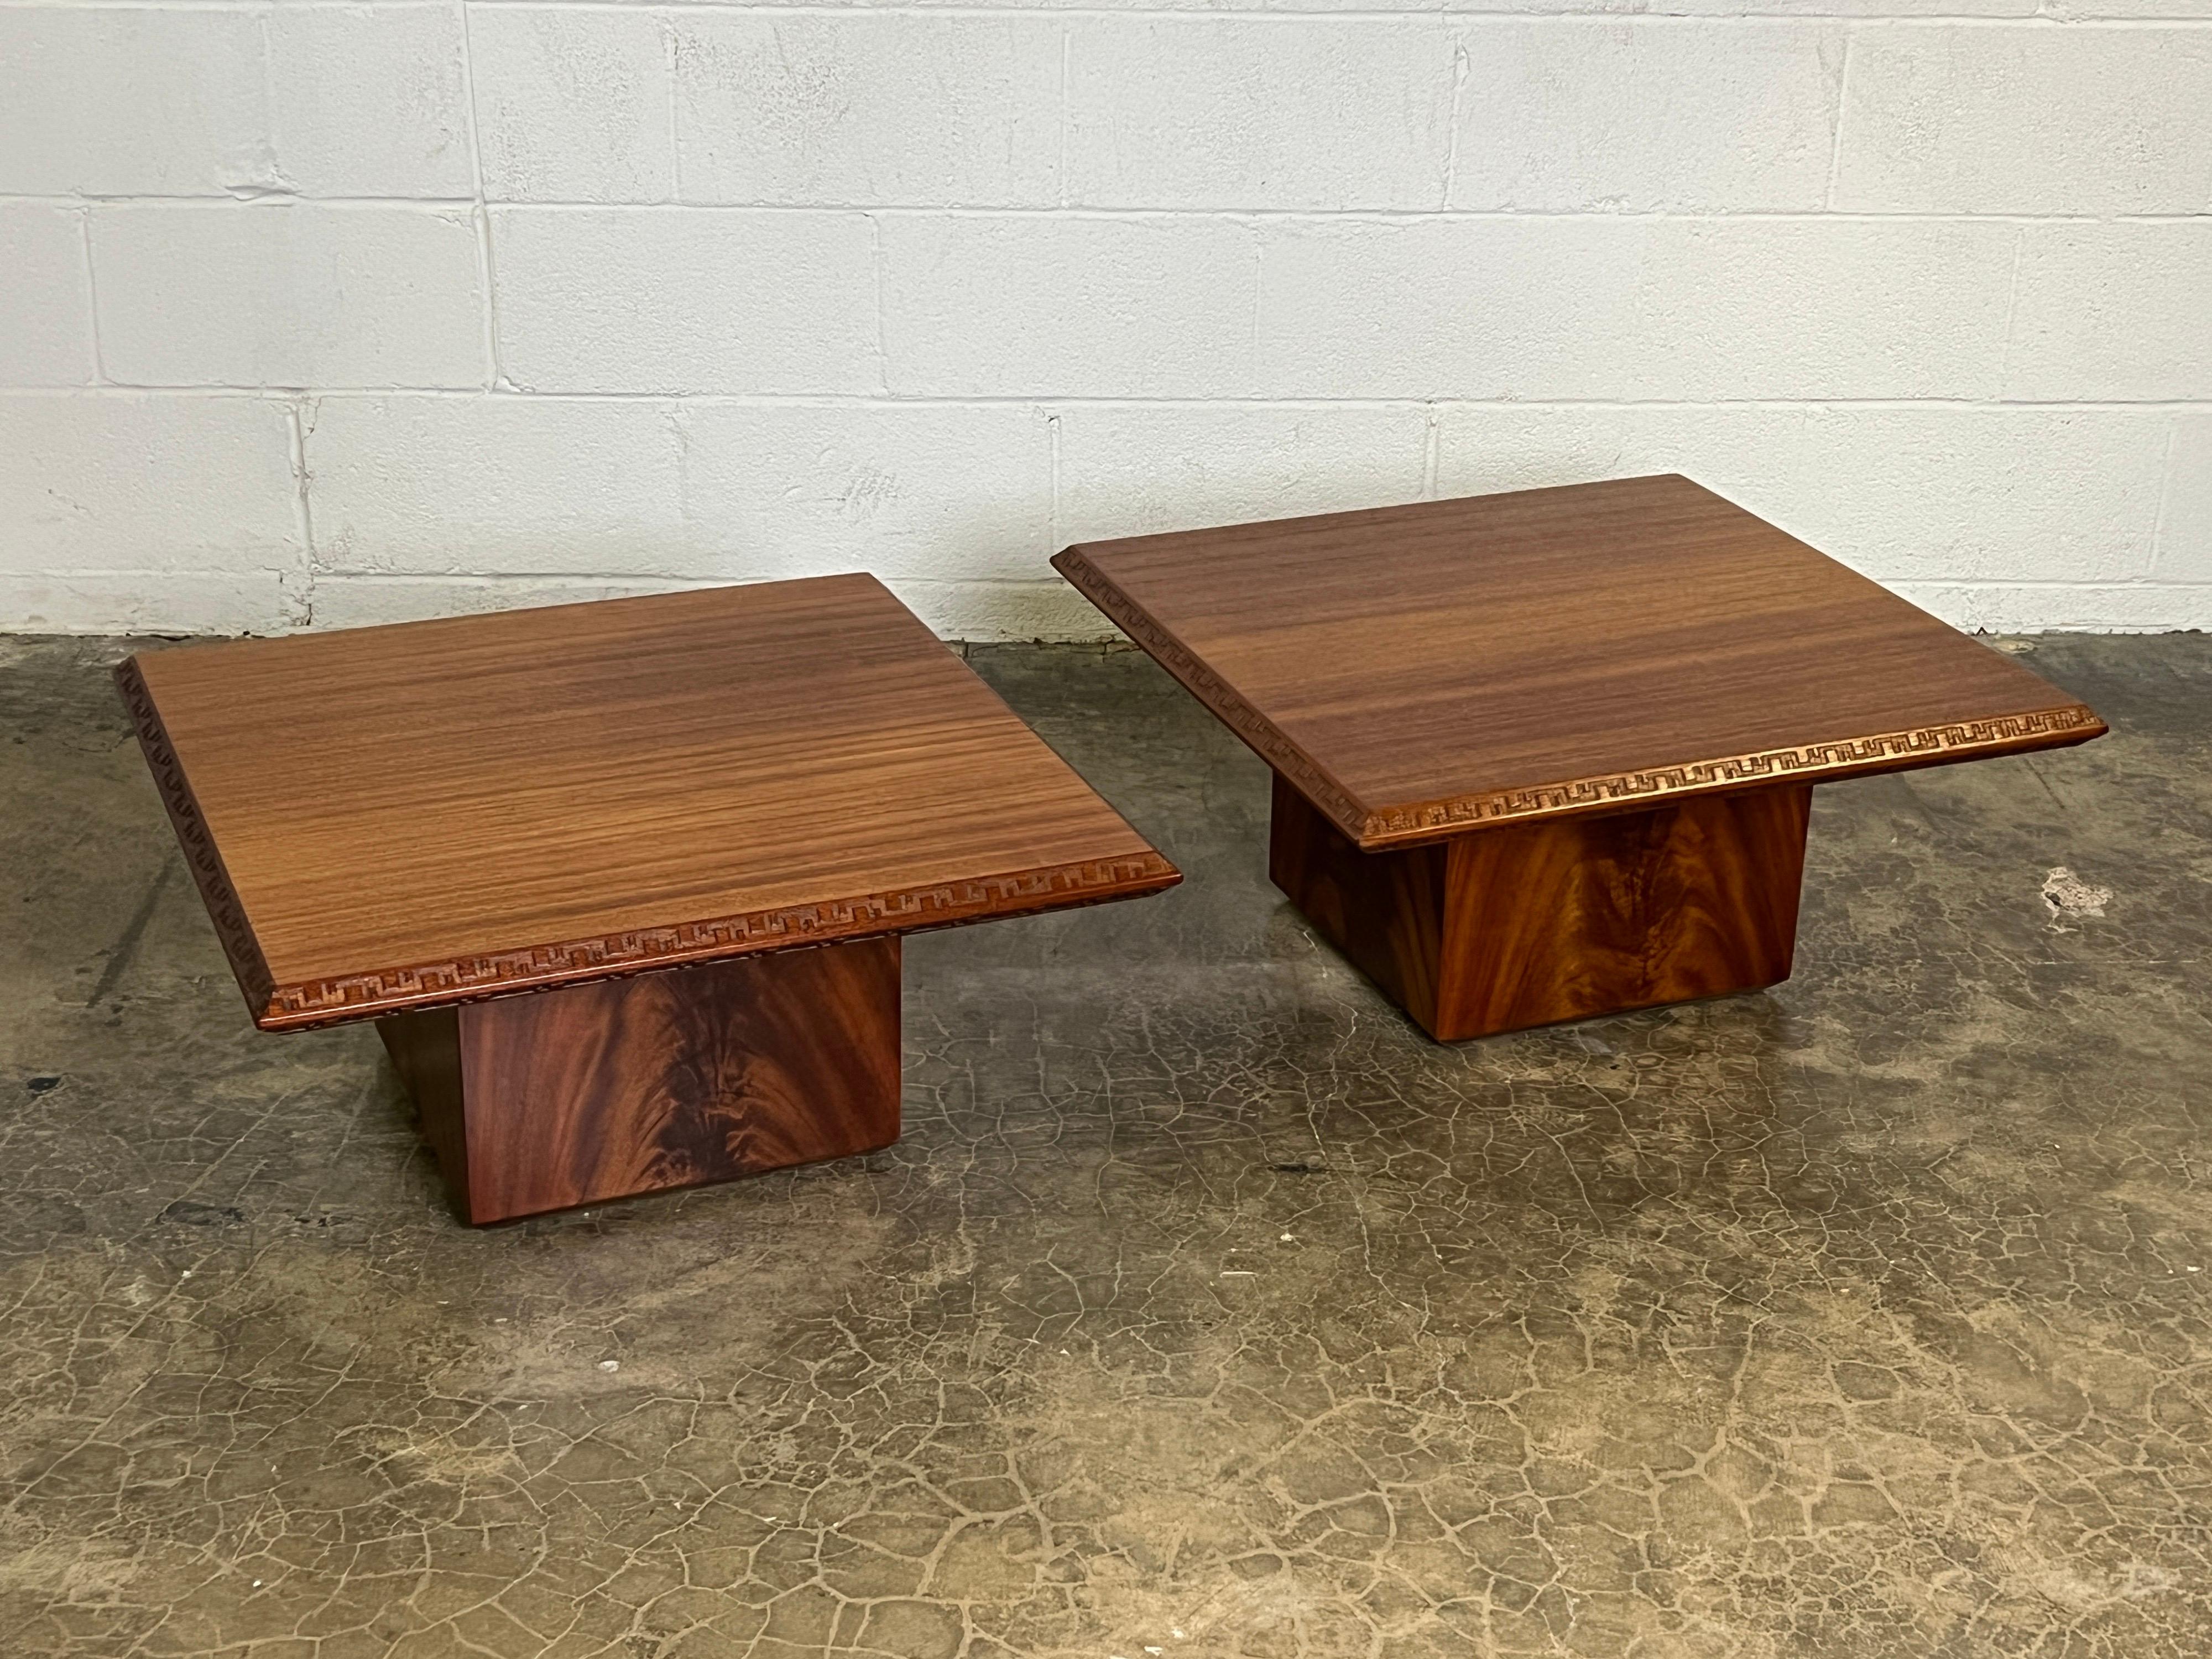 A pair of mahogany tables designed by Frank Lloyd Wright for Henredon.